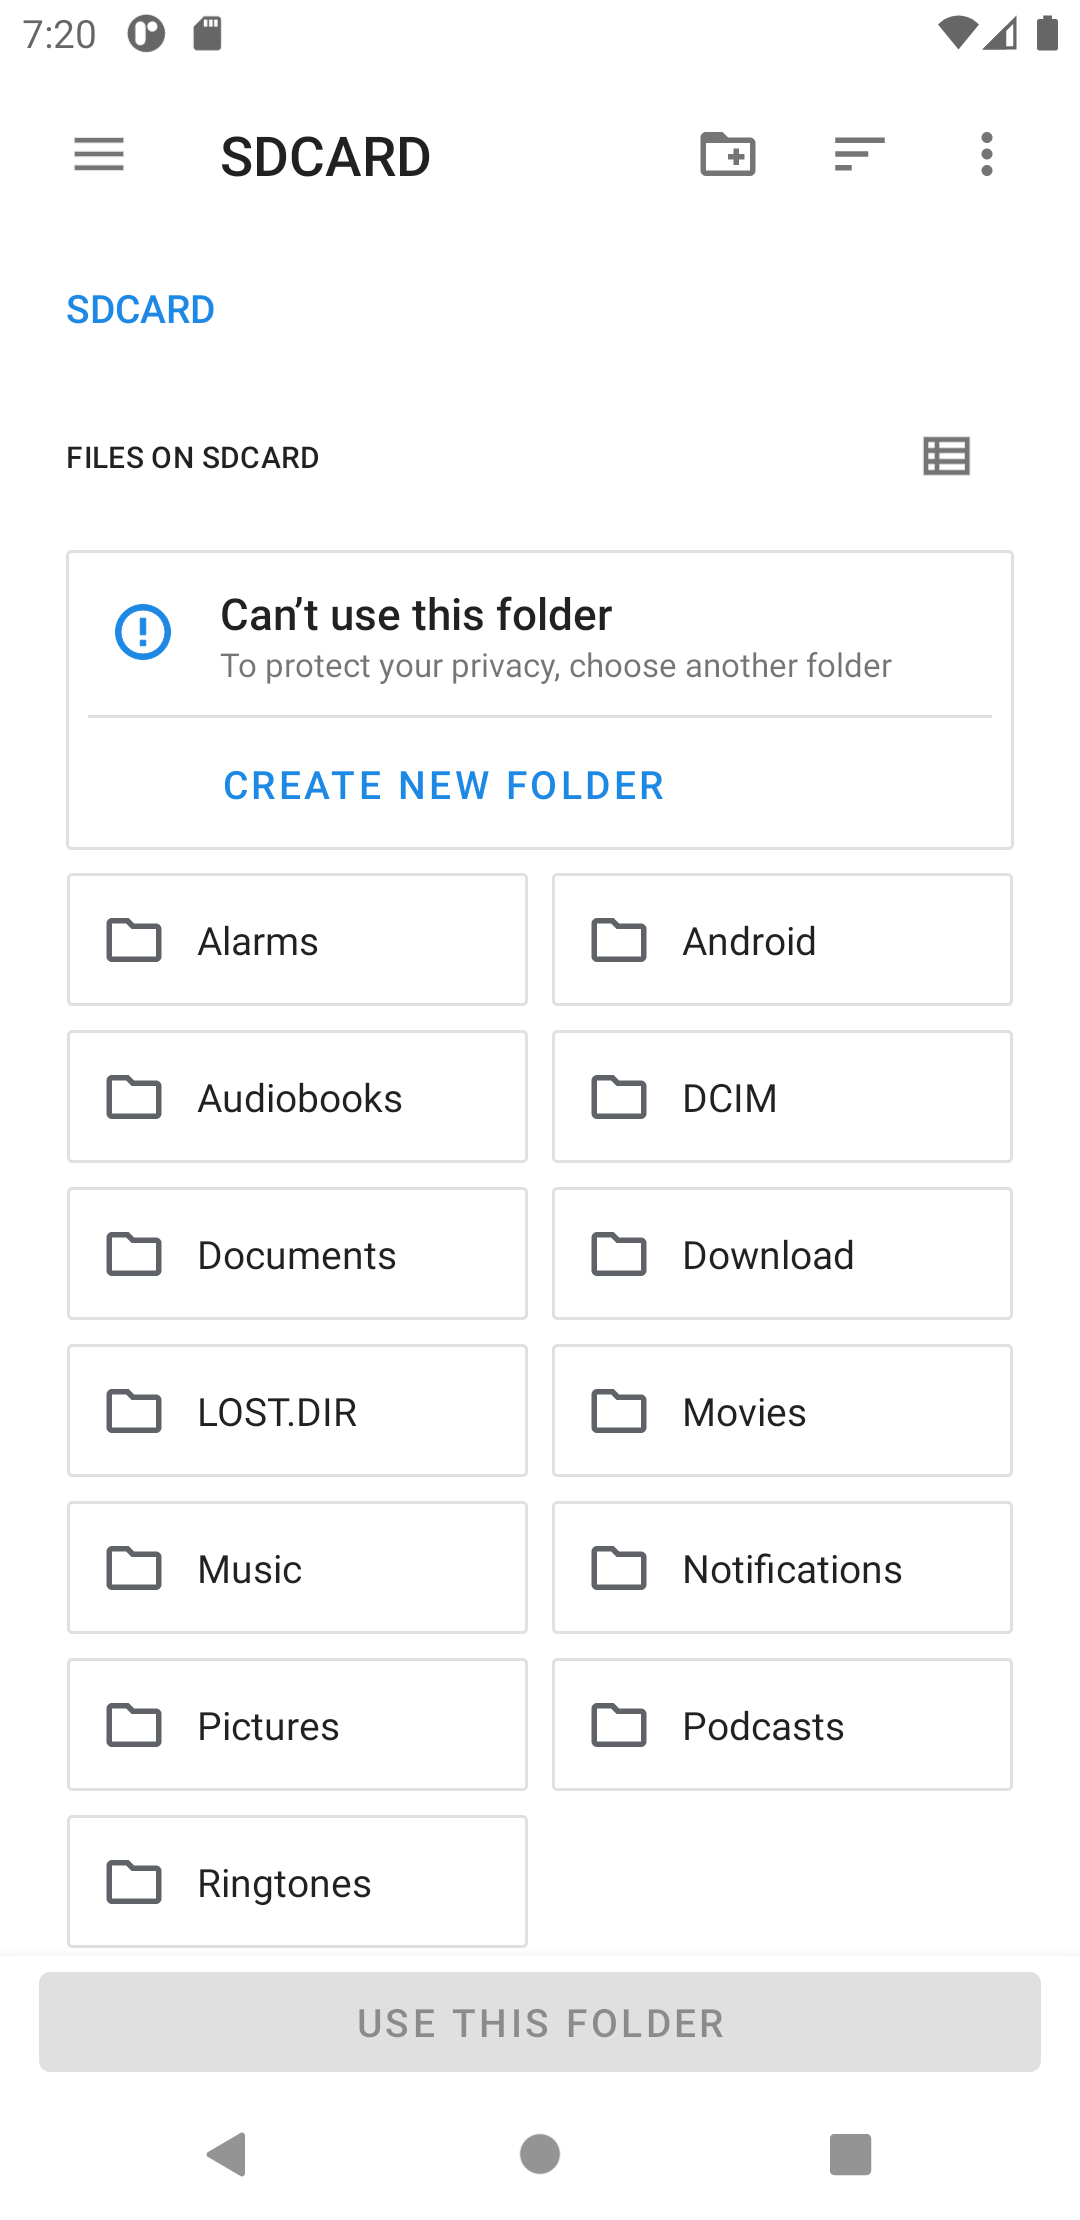 Pick a location to create the folder